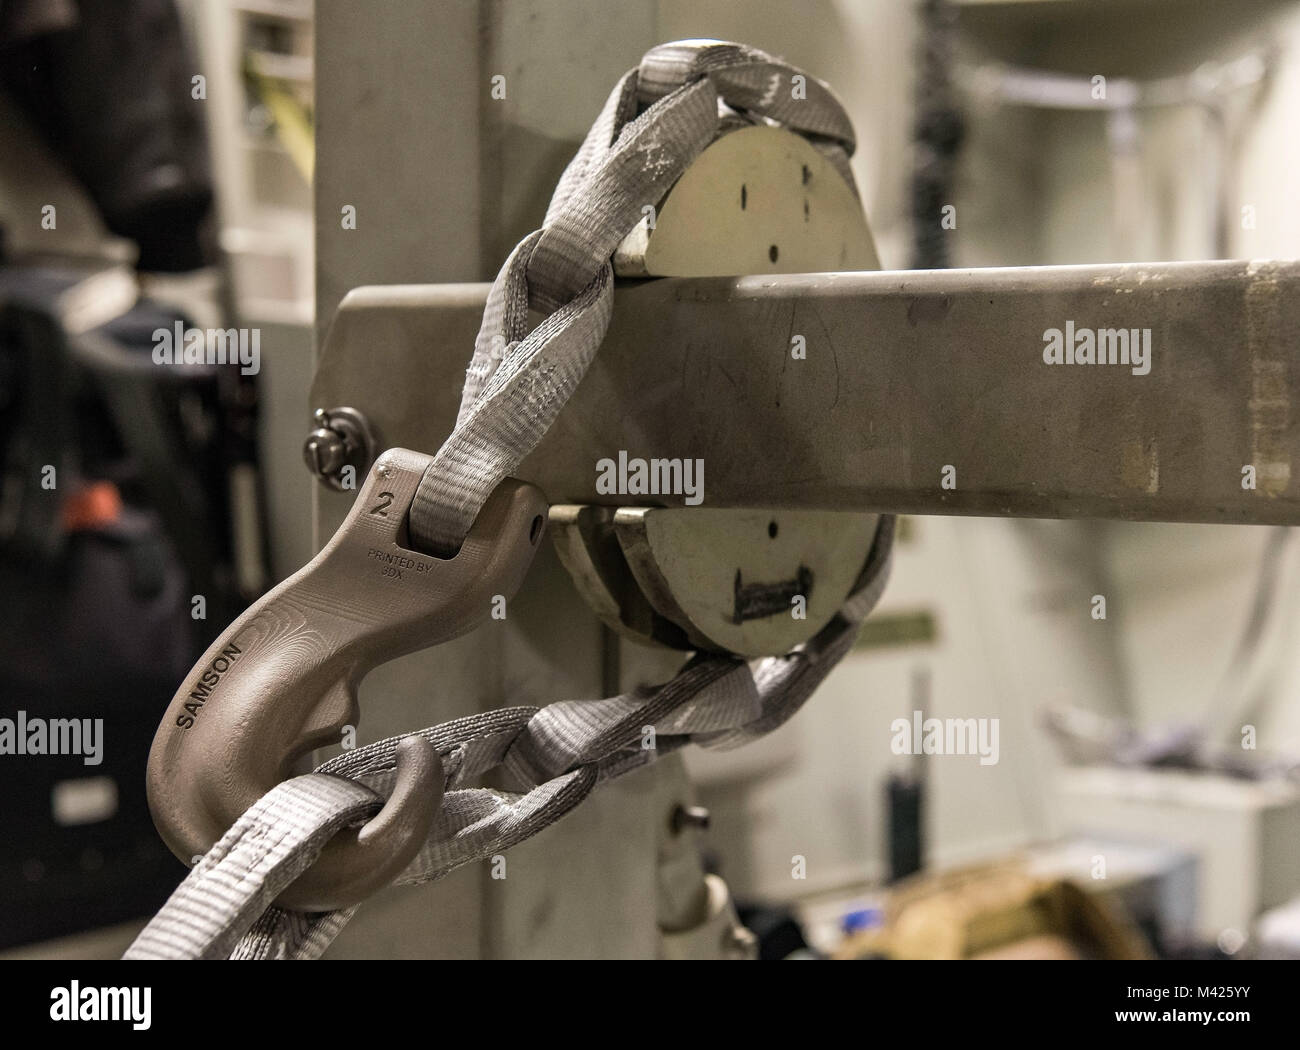 A synthetic tie-down chain rests in the slotted interface designed for steel chains used on a buffer stop assembly, Jan. 30, 2018 at Dover Air Force Base, Del. The buffer stop assembly is a device used during specific C-17 Globemaster III airdrop missions to keep pallets from shifting forward in the cargo compartment. (U.S. Air Force photo by Roland Balik) Stock Photo